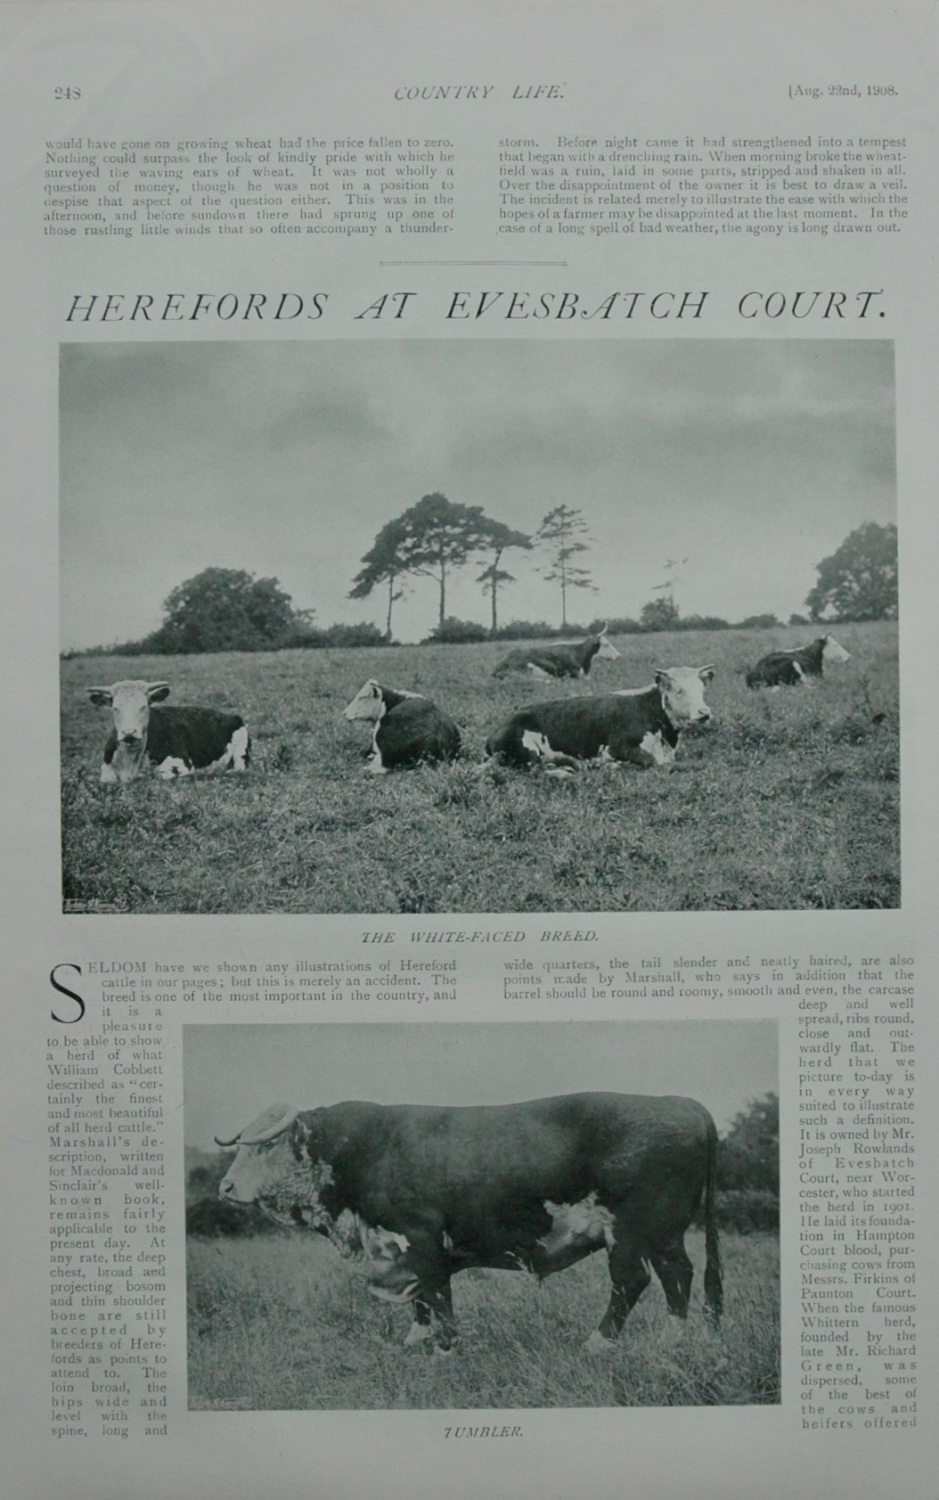 Herefords at Evesbatch Court